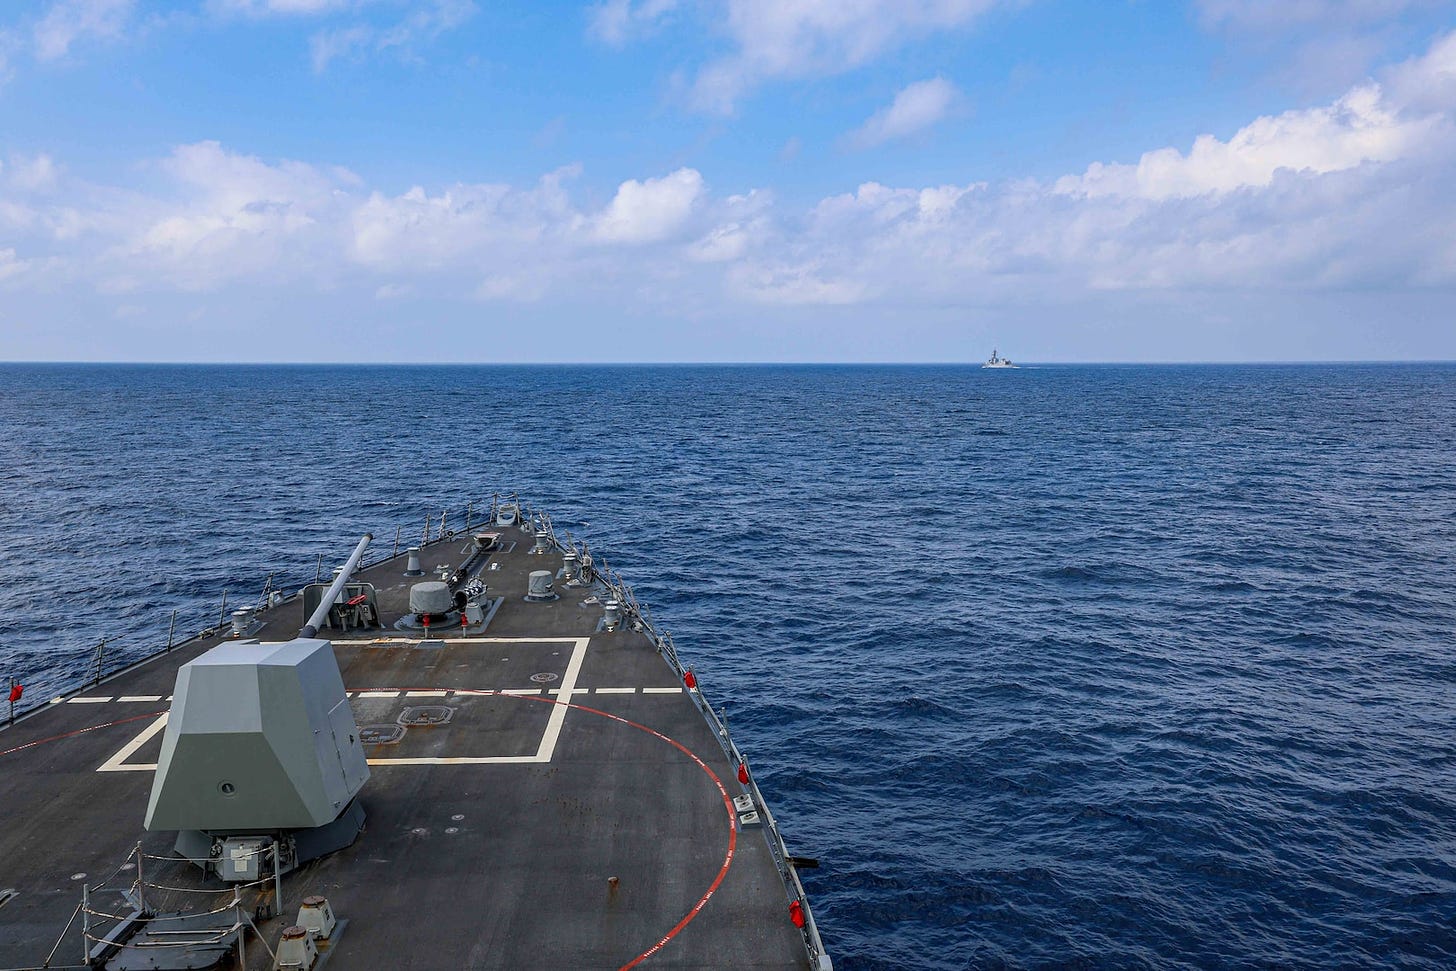 The Arleigh Burke-class guided-missile destroyer USS John Finn (DDG 113), sails with the Japan Maritime Self-Defense Force ship JS Sazanami (DD 113) and Royal Australian Navy ship HMAS Warramunga (FFH 152) during trilateral operations in the South China Sea, Feb. 7.